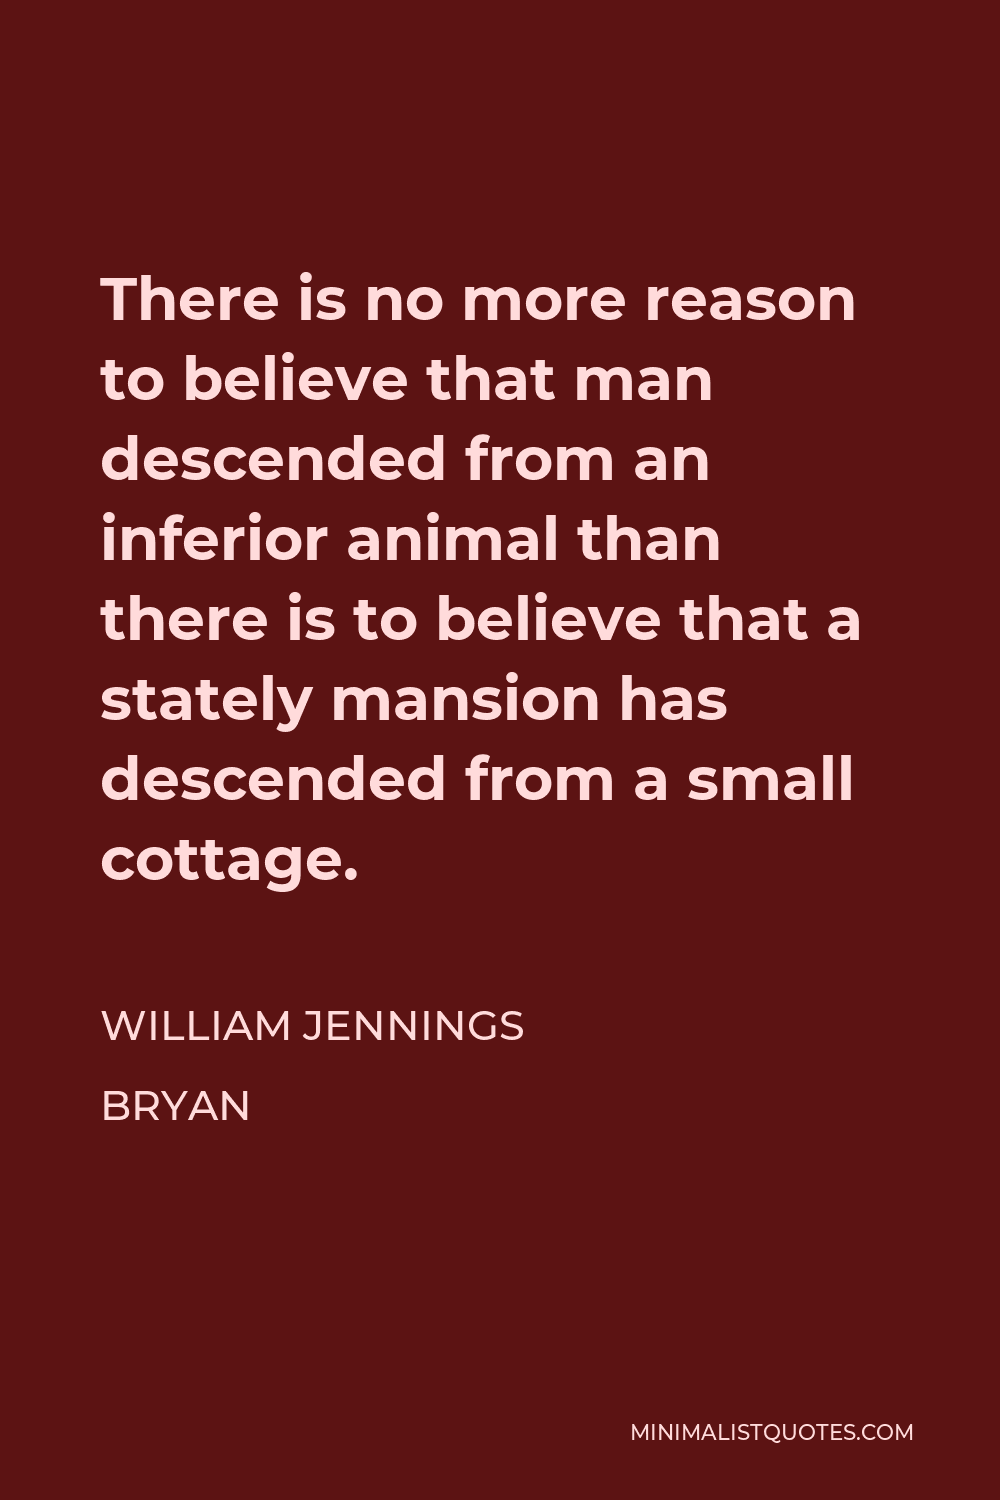 William Jennings Bryan Quote - There is no more reason to believe that man descended from an inferior animal than there is to believe that a stately mansion has descended from a small cottage.